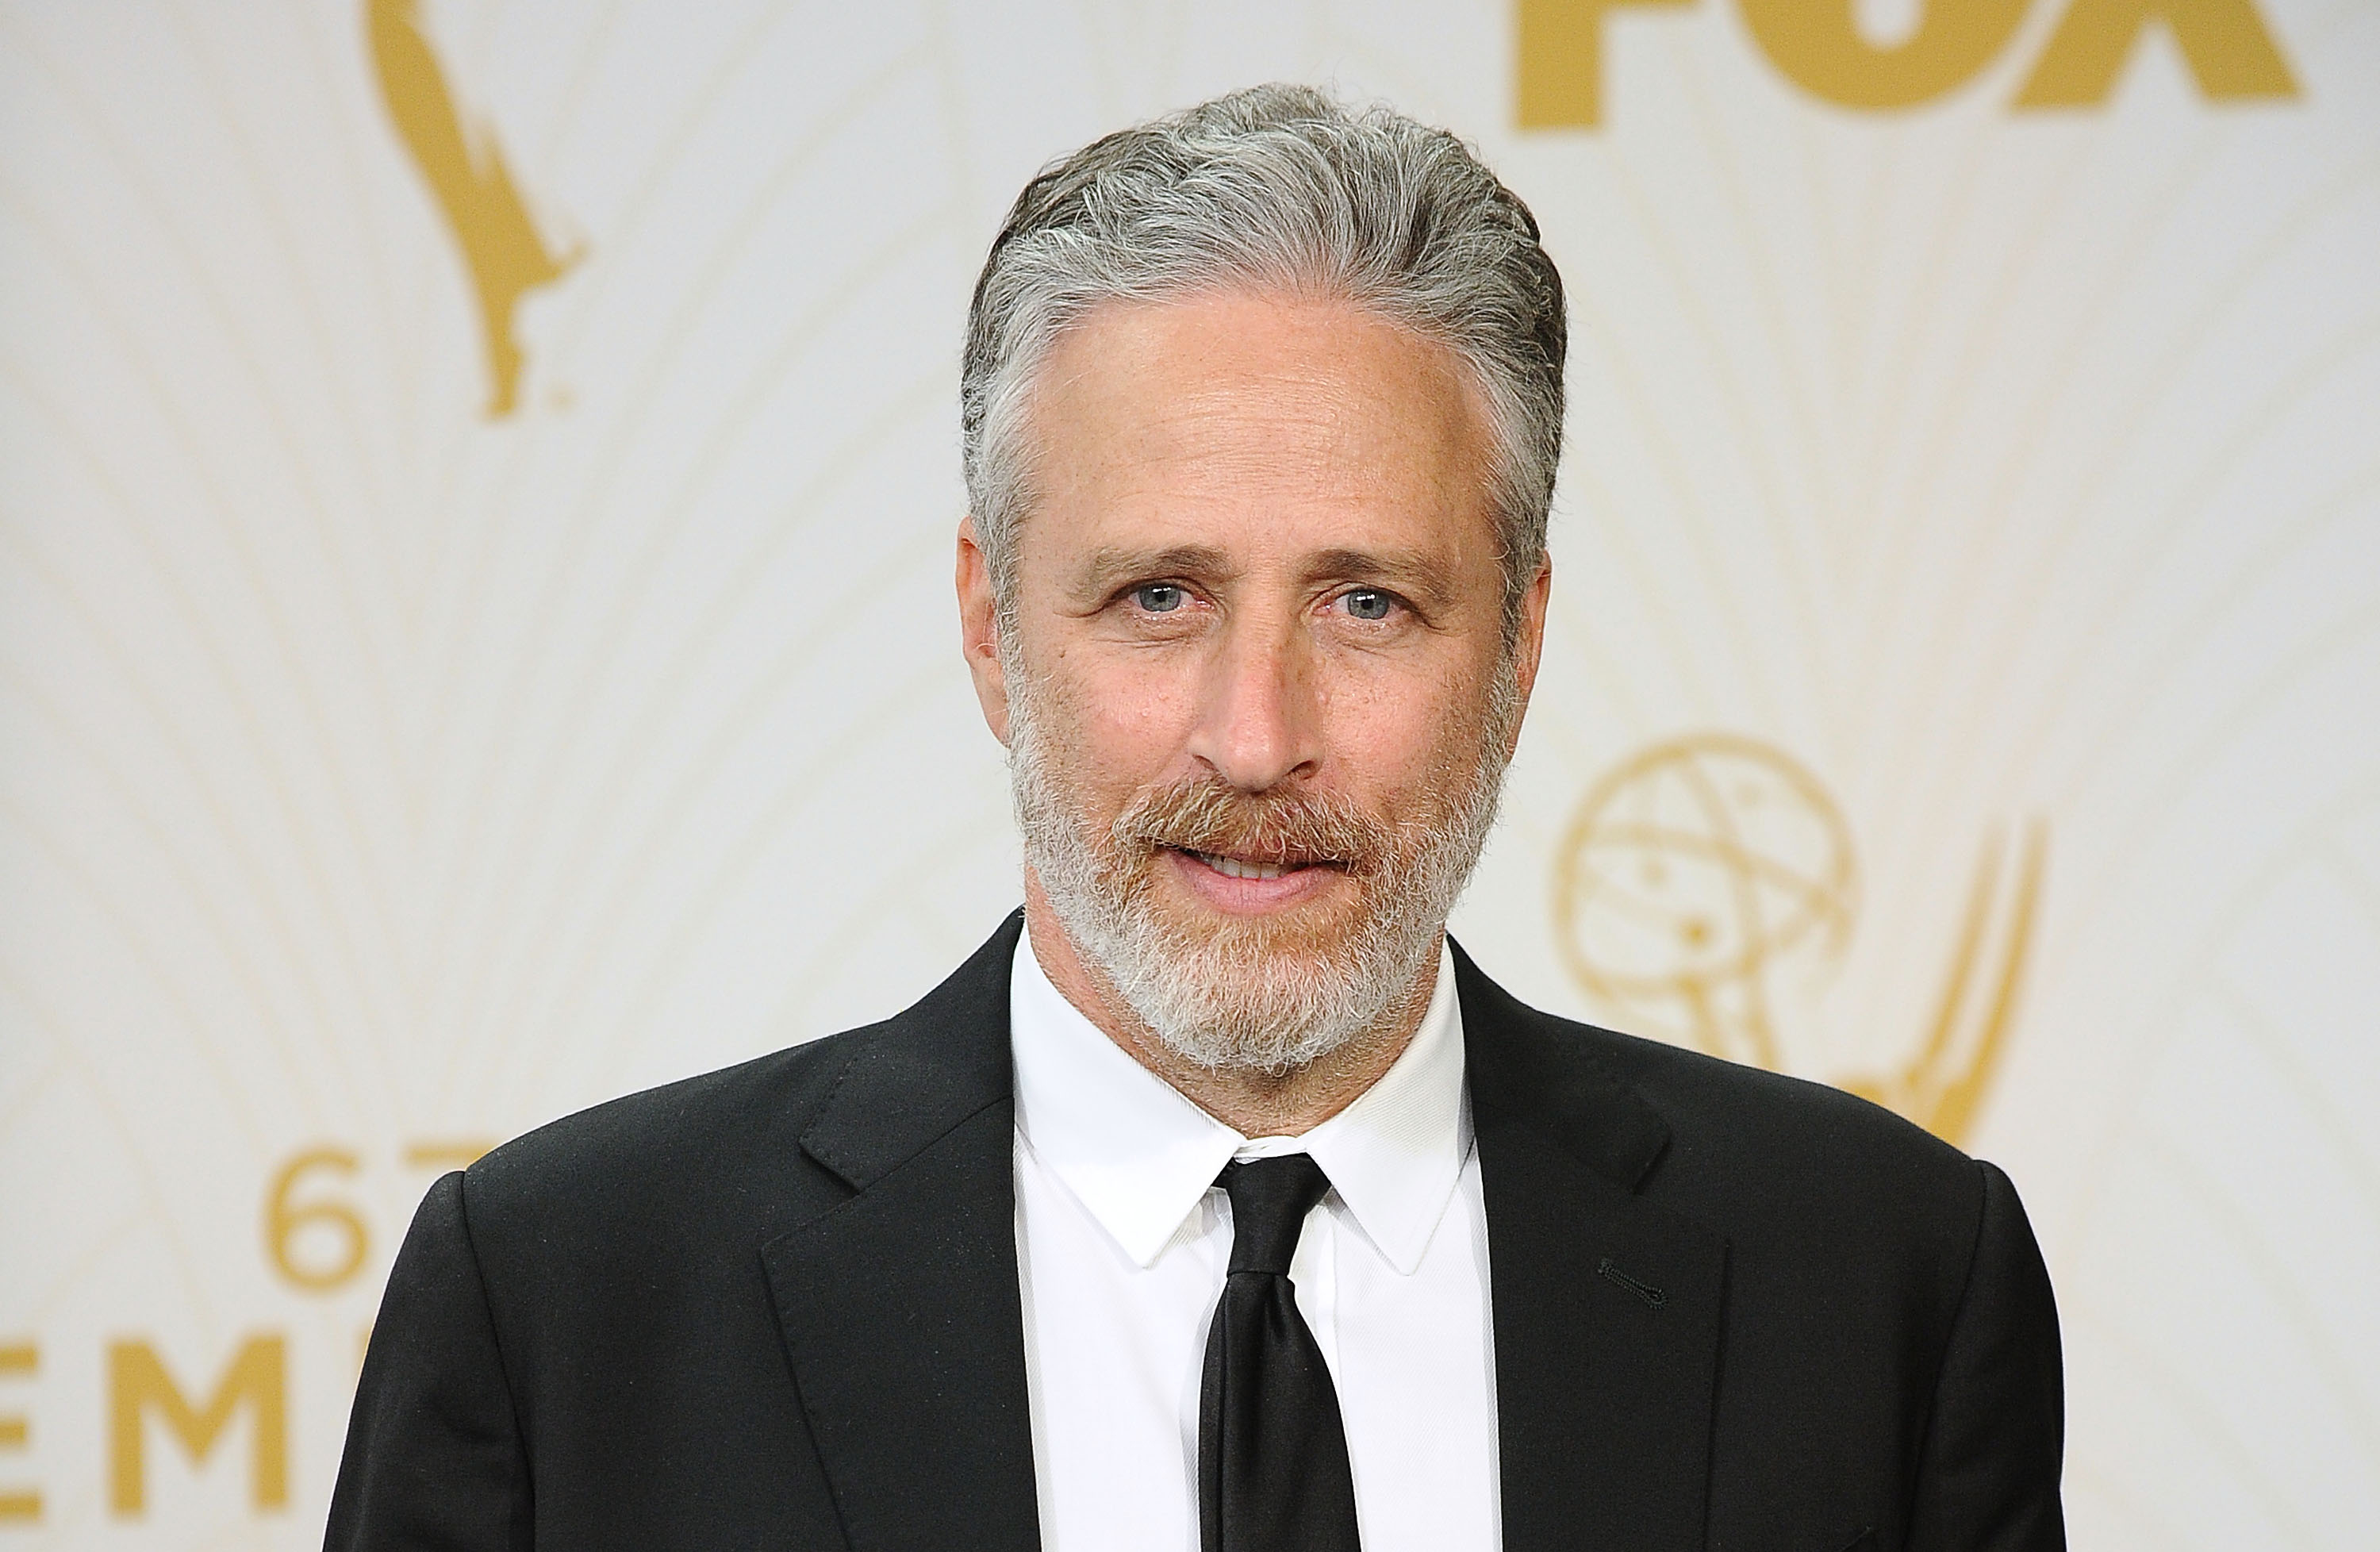 Jon Stewart poses in the press room at the 67th annual Primetime Emmy Awards at Microsoft Theater on September 20, 2015 in Los Angeles, California. (Jason LaVeris&mdash;FilmMagic/Getty Images)